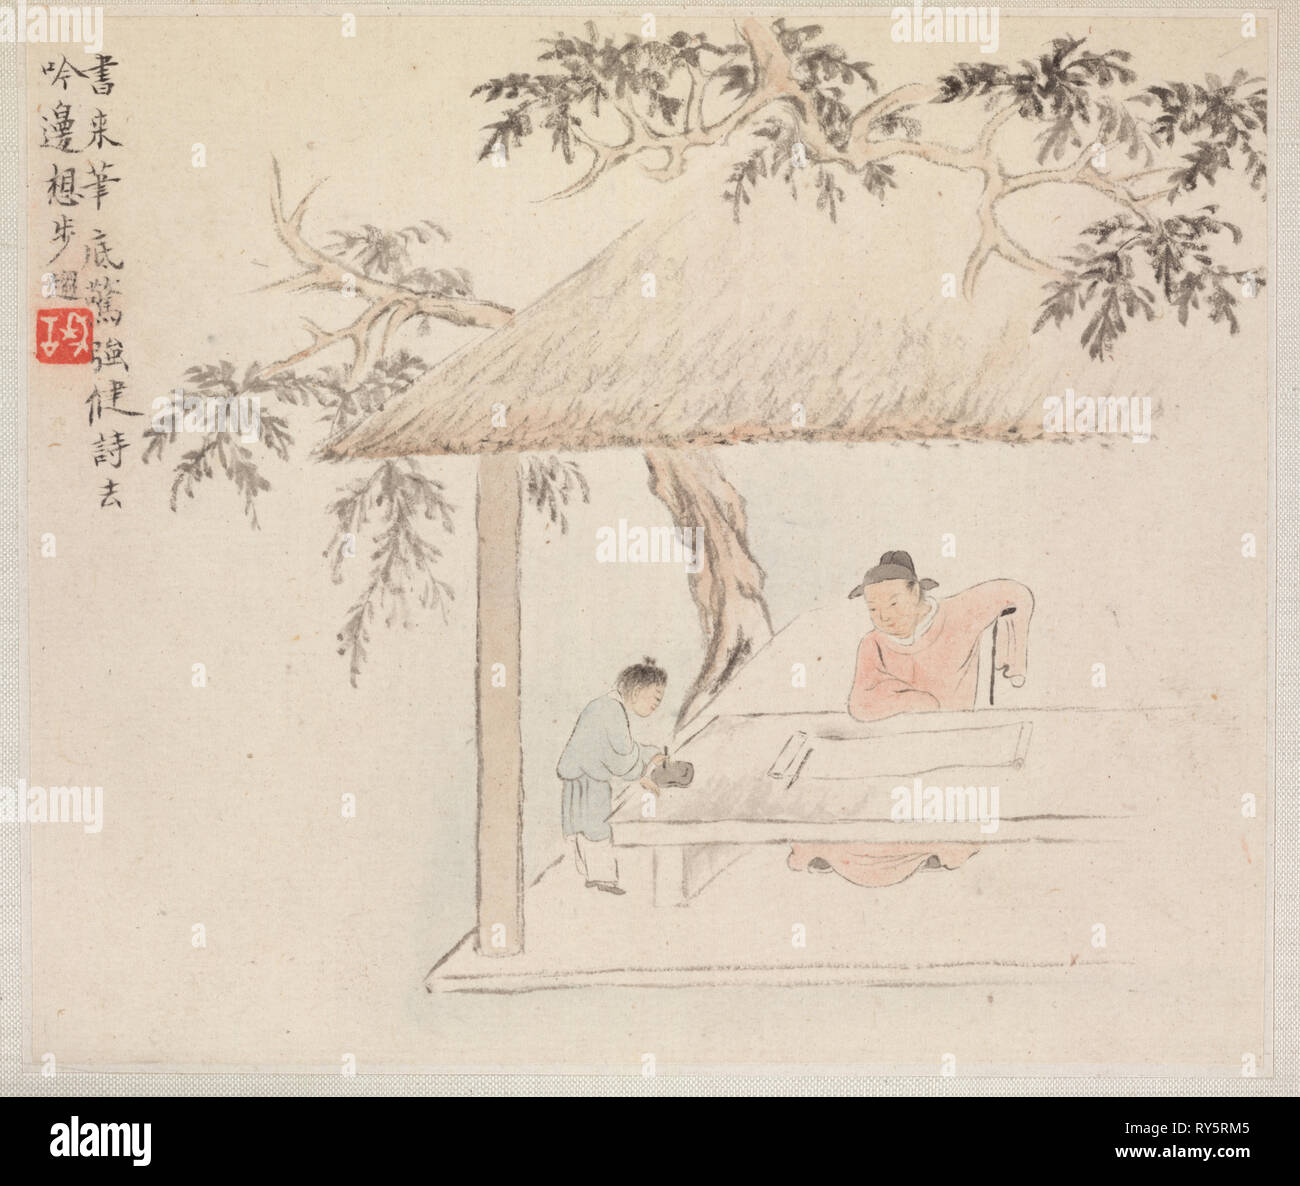 Album of Landscape Paintings Illustrating Old Poems: A Man Sits at a Table before an Open Scroll; a Boy Mixes Ink, 1700s. Hua Yan (Chinese, 1682-about 1765). Album leaf, ink and light color on paper; image: 11.2 x 13.1 cm (4 7/16 x 5 3/16 in.); album, closed: 15 x 18.5 cm (5 7/8 x 7 5/16 in Stock Photo